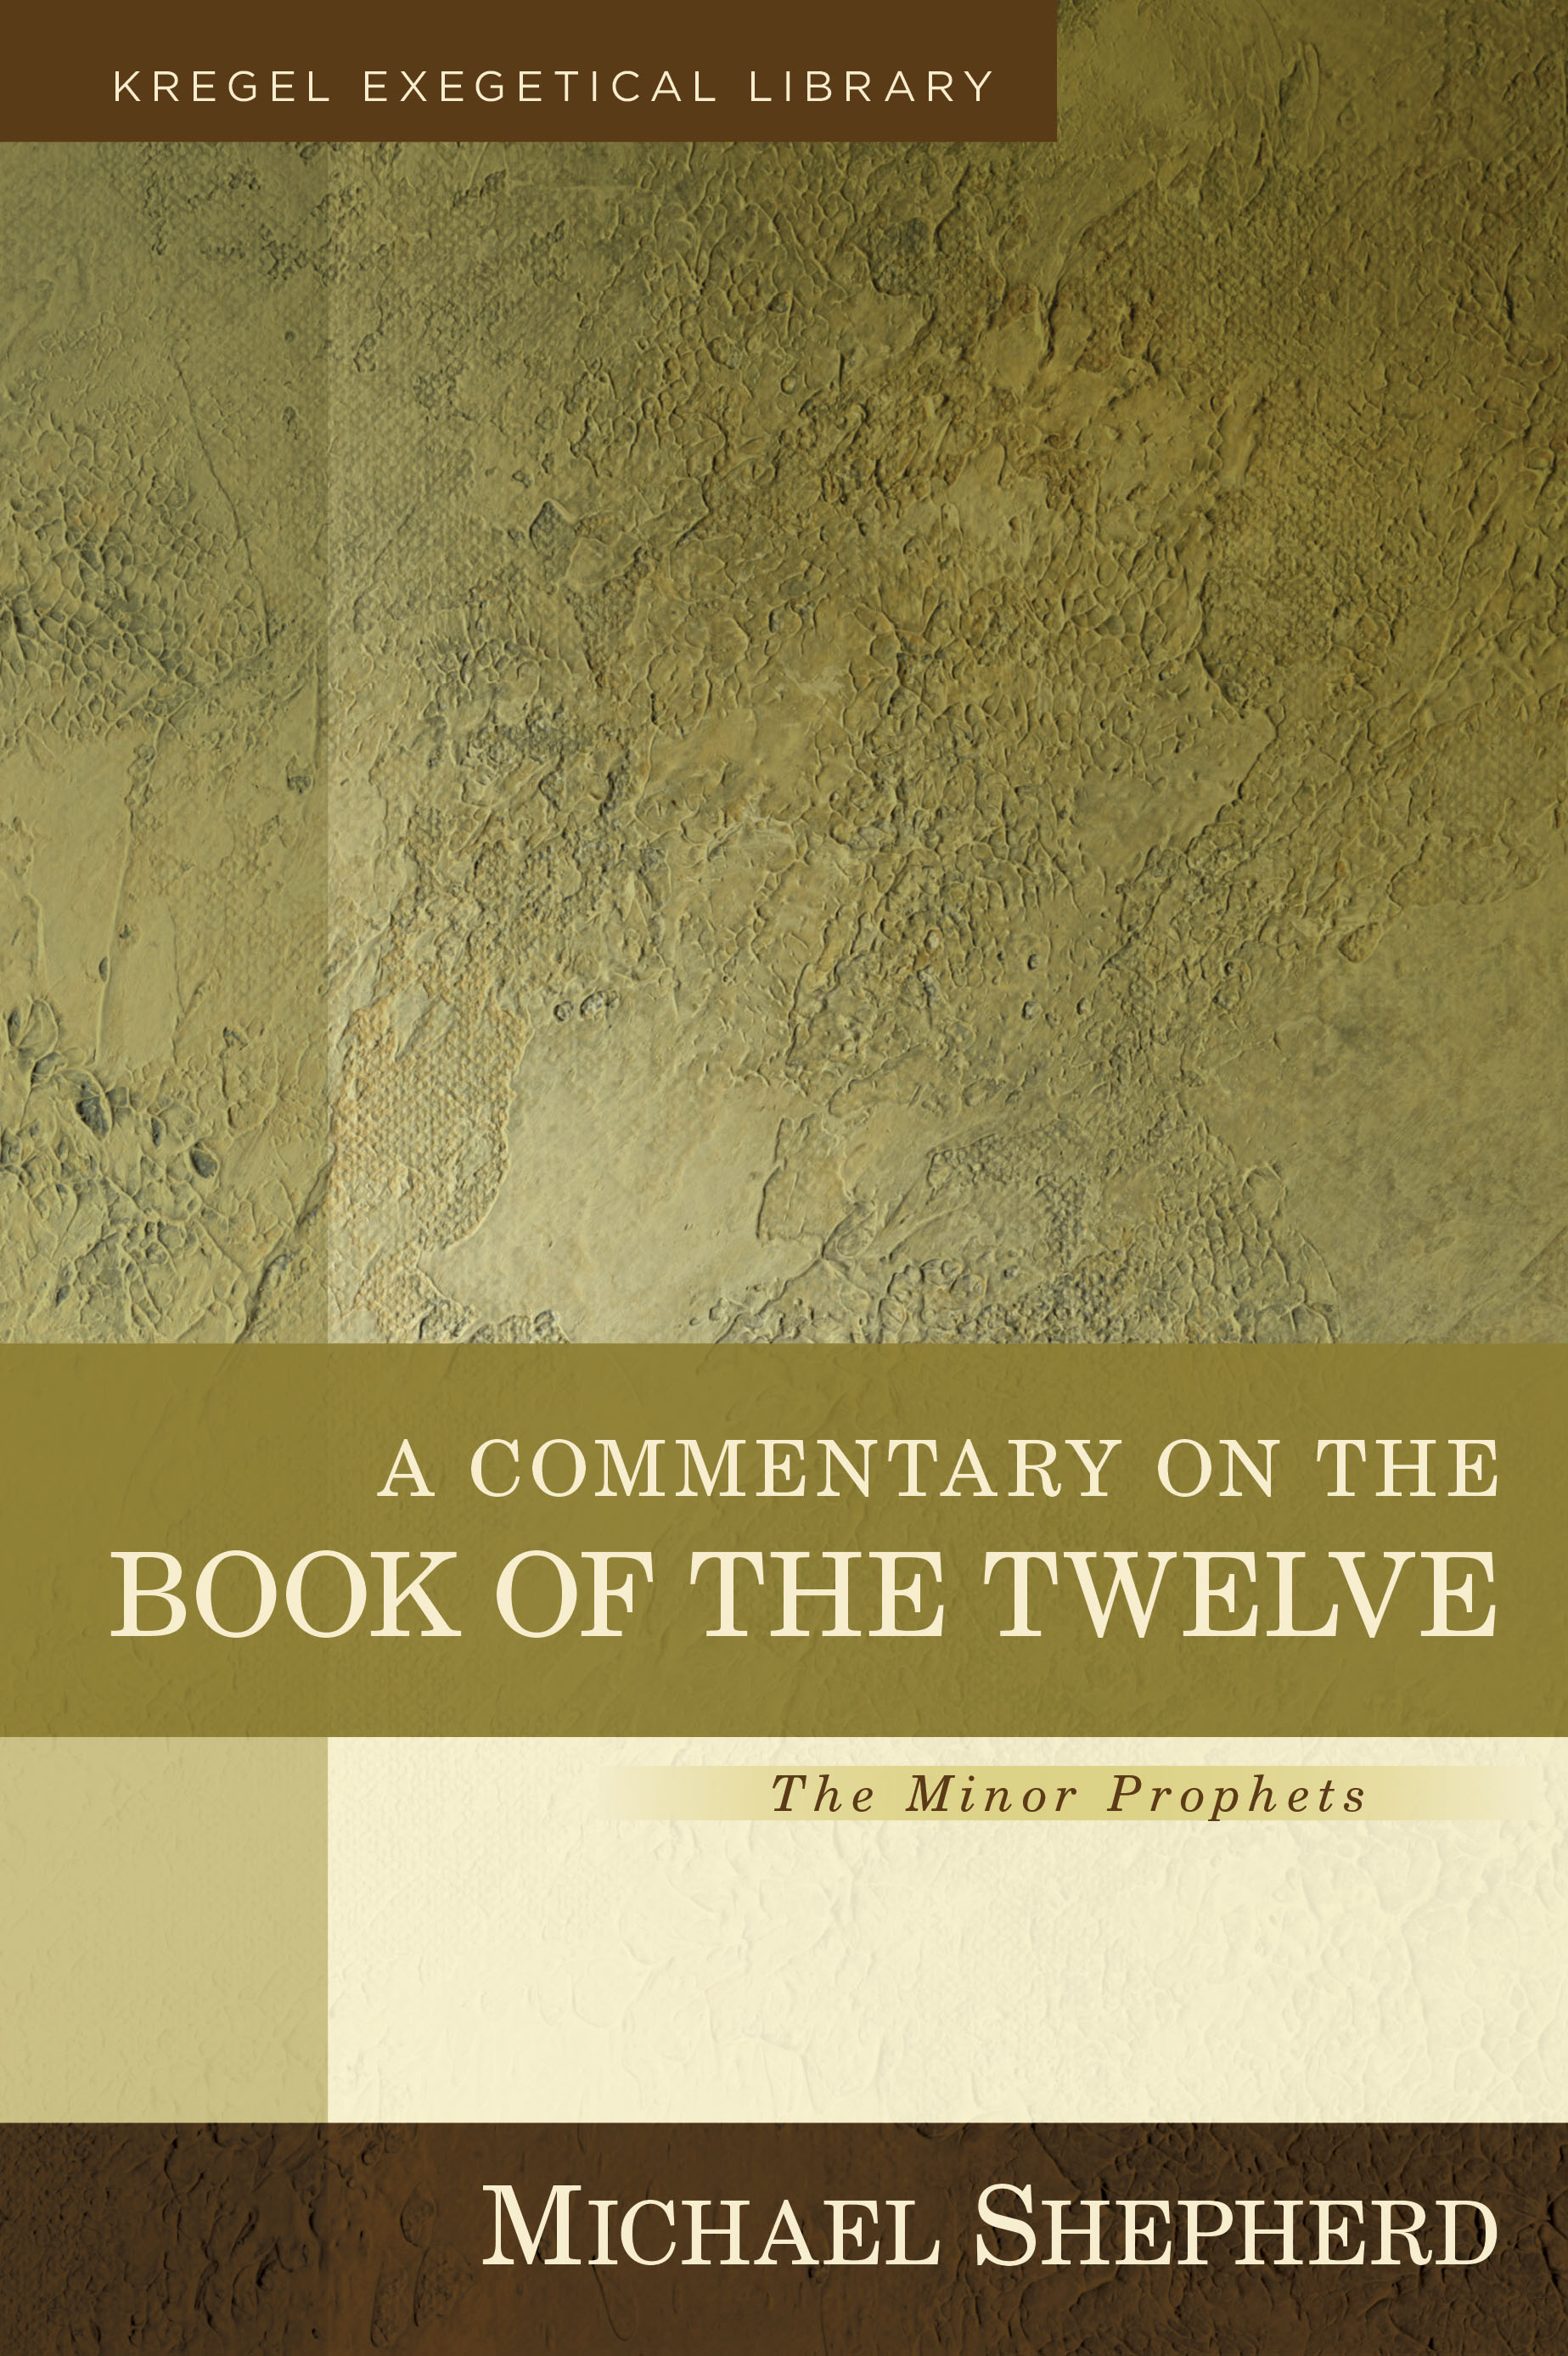 A Commentary on the Book of the Twelve: The Minor Prophets